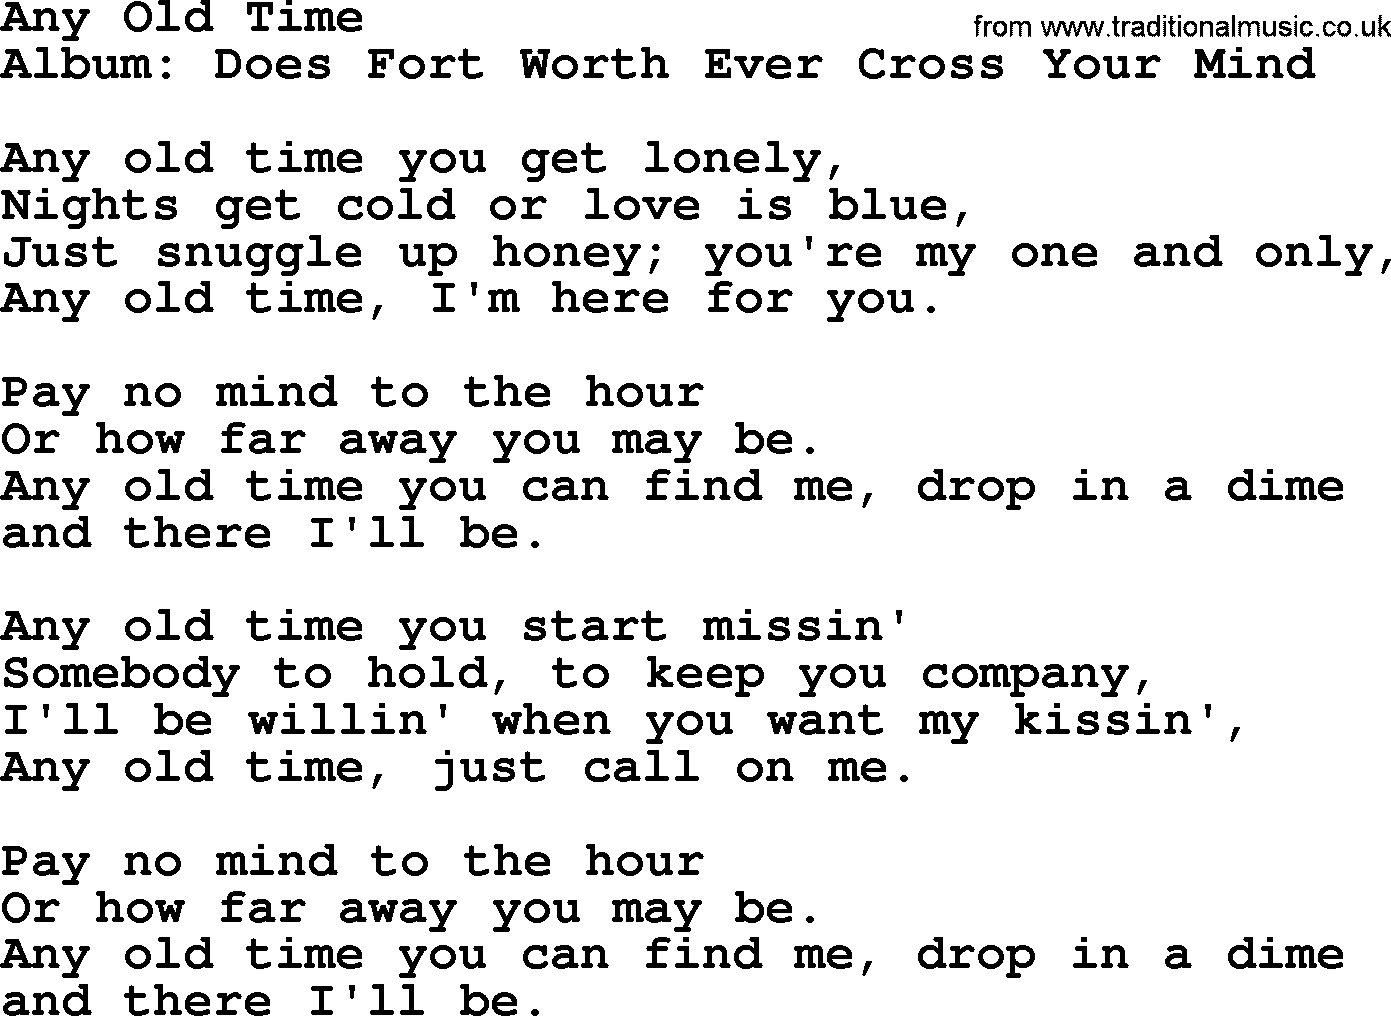 George Strait song: Any Old Time, lyrics